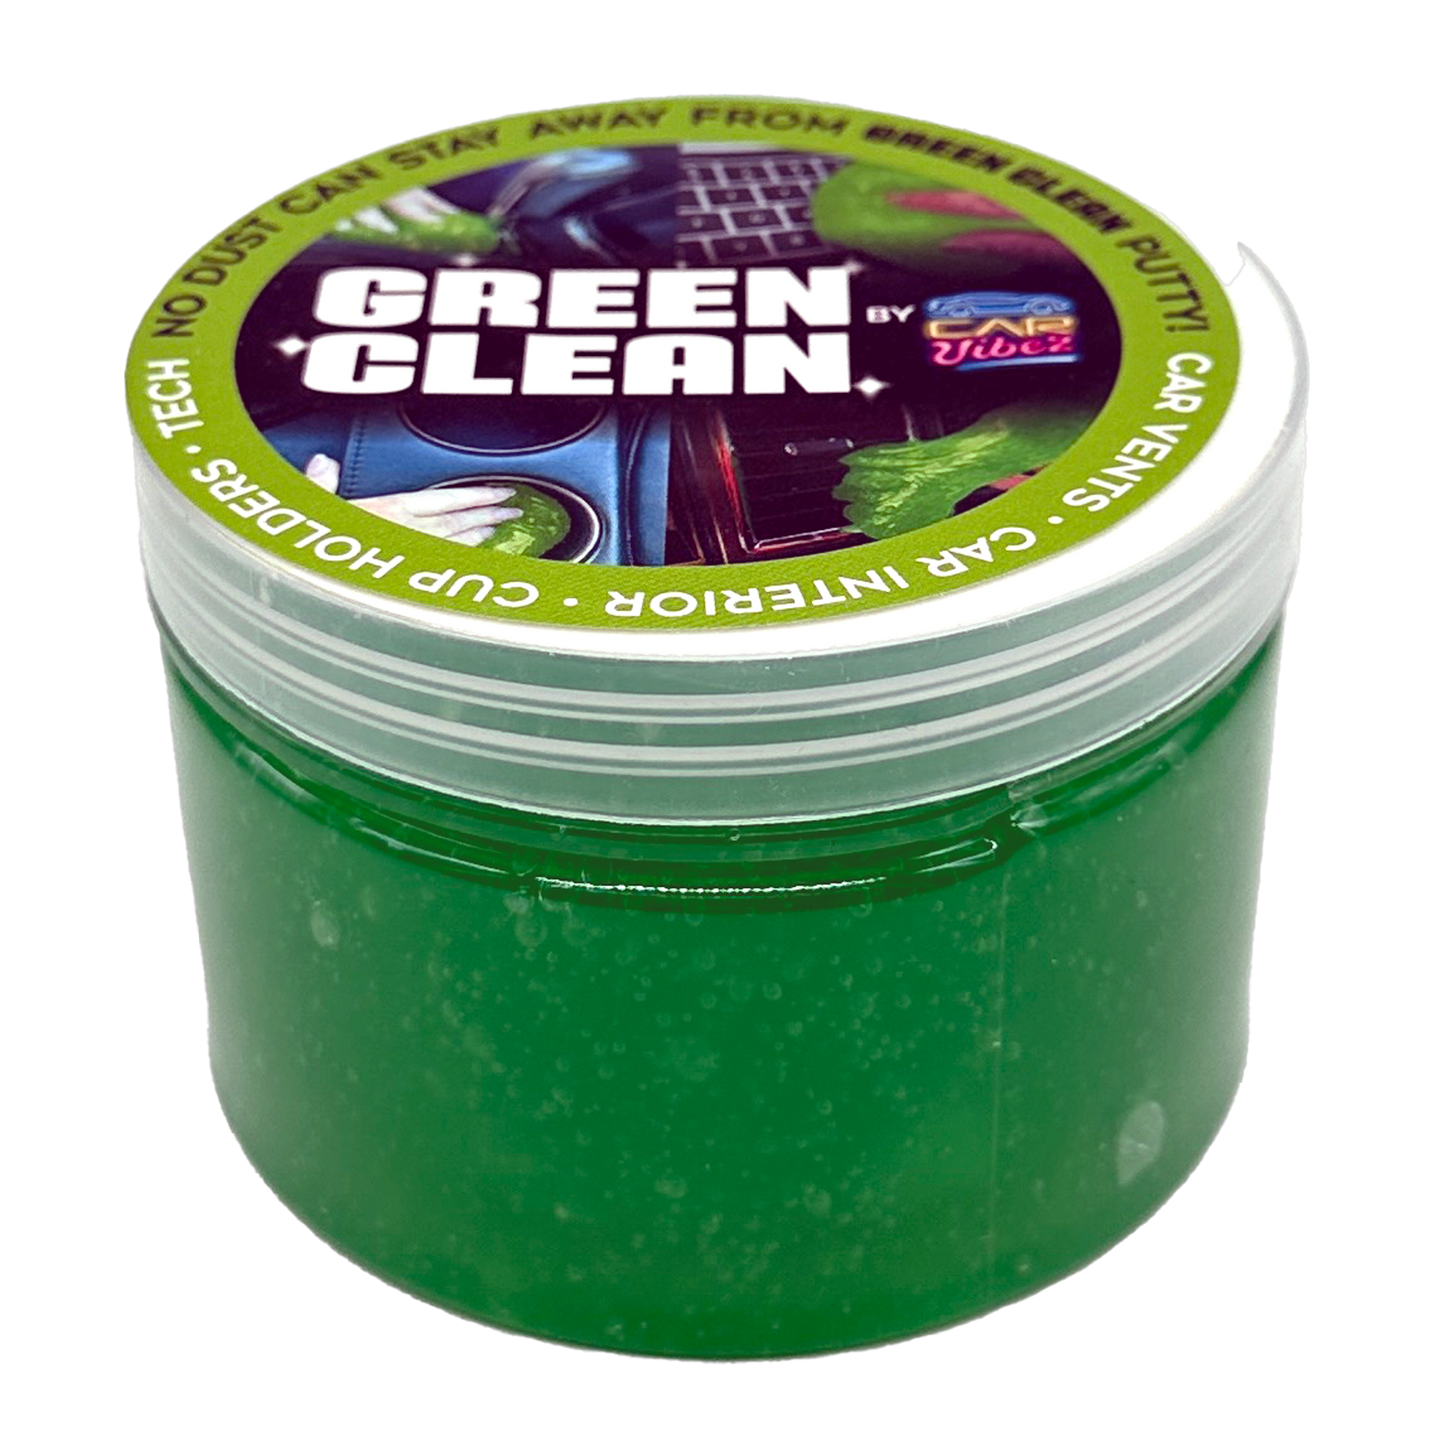 ITEM NUMBER 023718L GREEN CLEAN CAR PUTTY - STORE SURPLUS NO DISPLAY 6 PIECES PER PACK